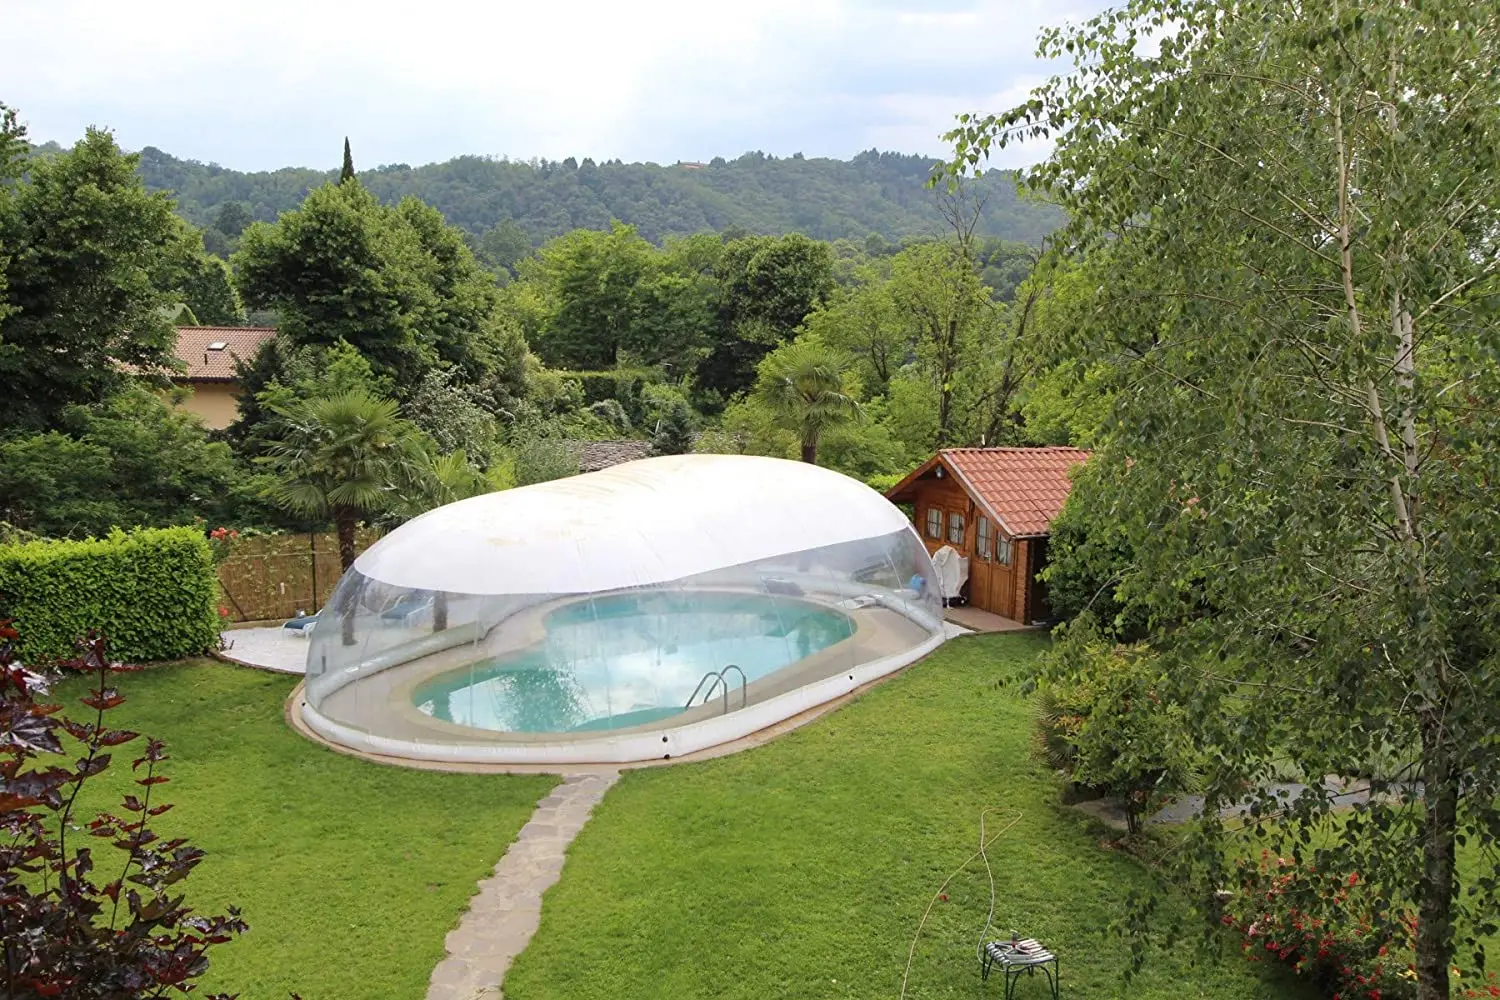 Clear Above Ground Swimming Pool Bubble Dome Tent  Inflatable Hot Tub Swimming Pool Enclosure Solar Dome Cover Tent